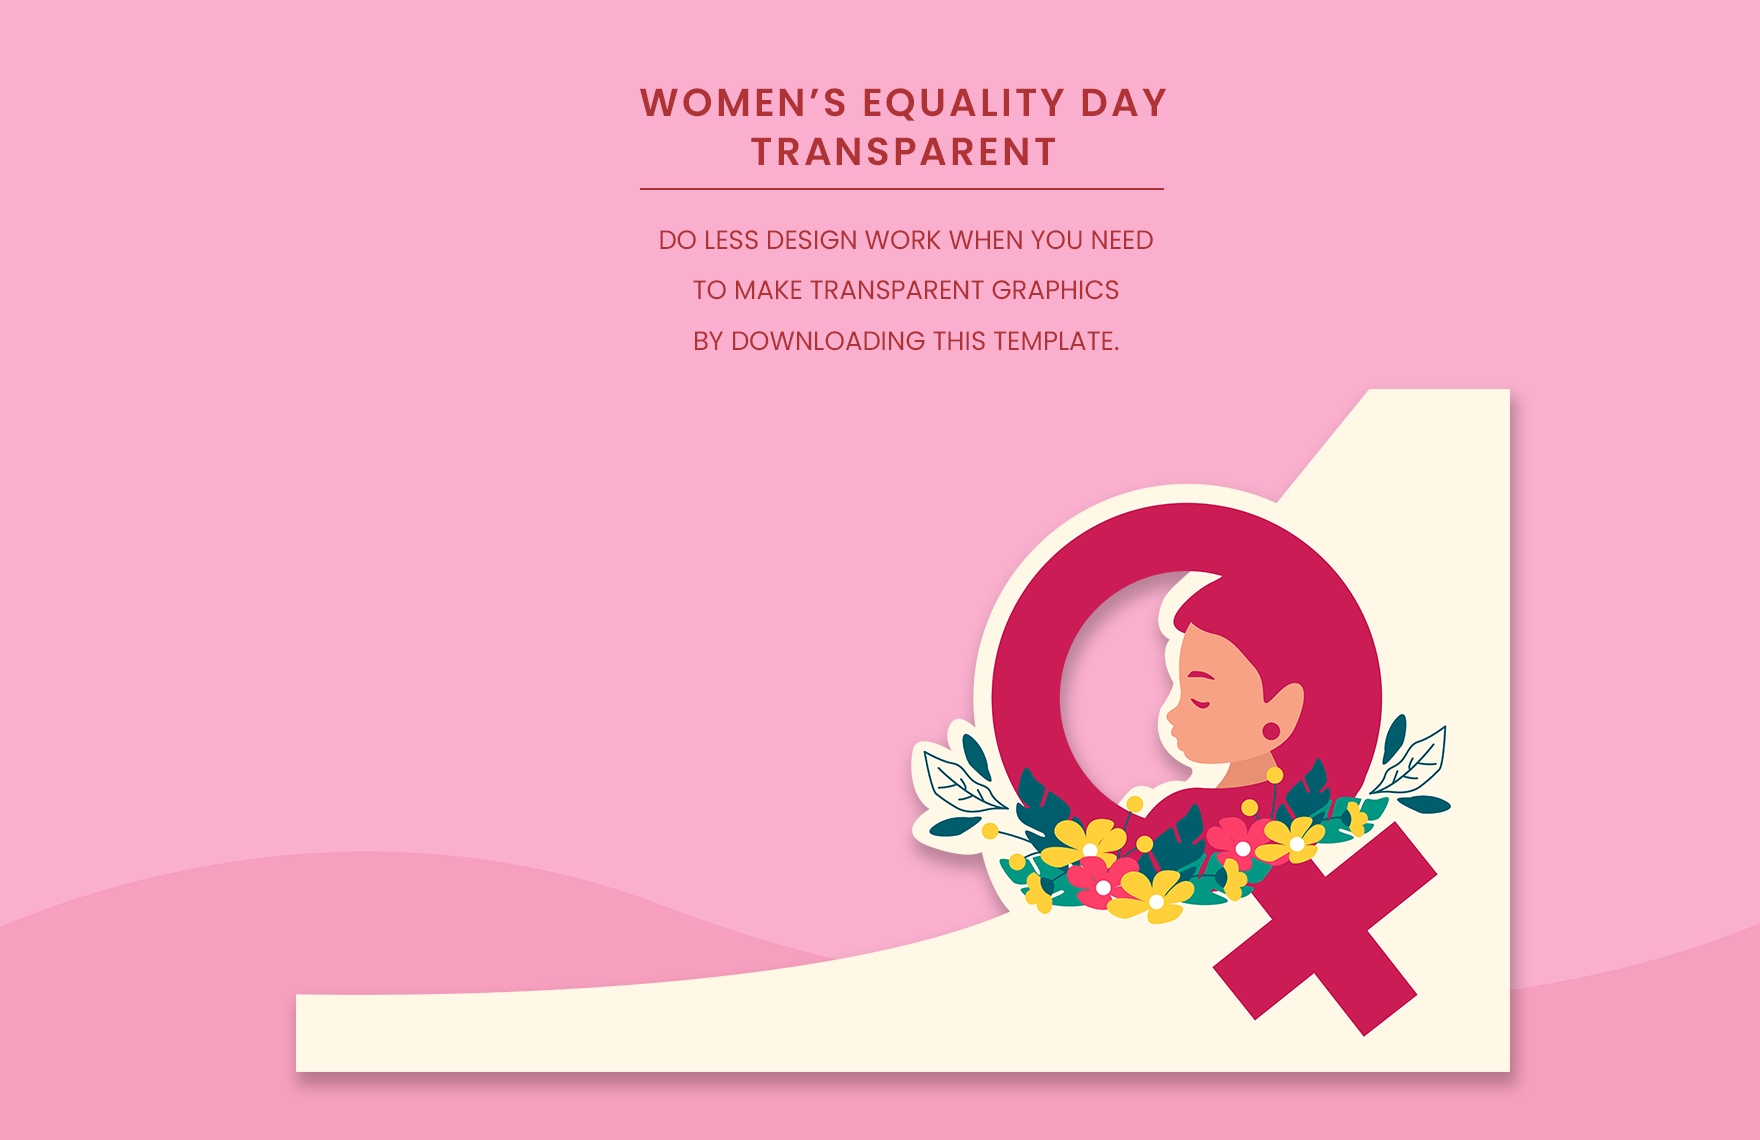 Free Women's Equality Day Transparent in PDF, Illustrator, SVG, PNG